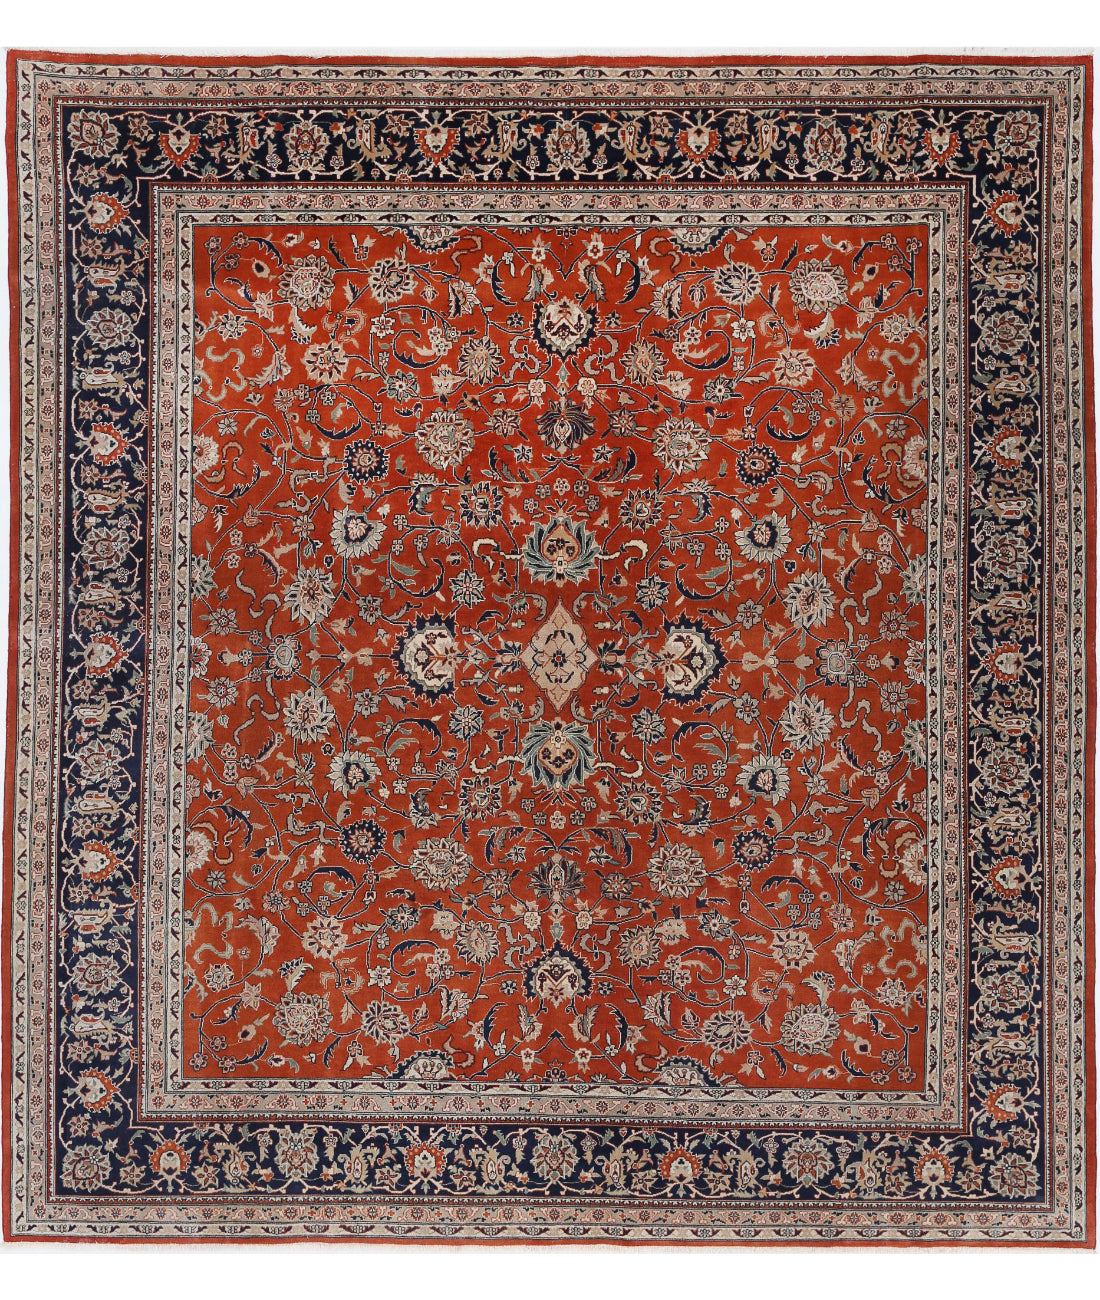 Hand Knotted Heritage Fine Persian Style Wool Rug - 8'5'' x 9'3'' 8'5'' x 9'3'' (253 X 278) / Red / Blue